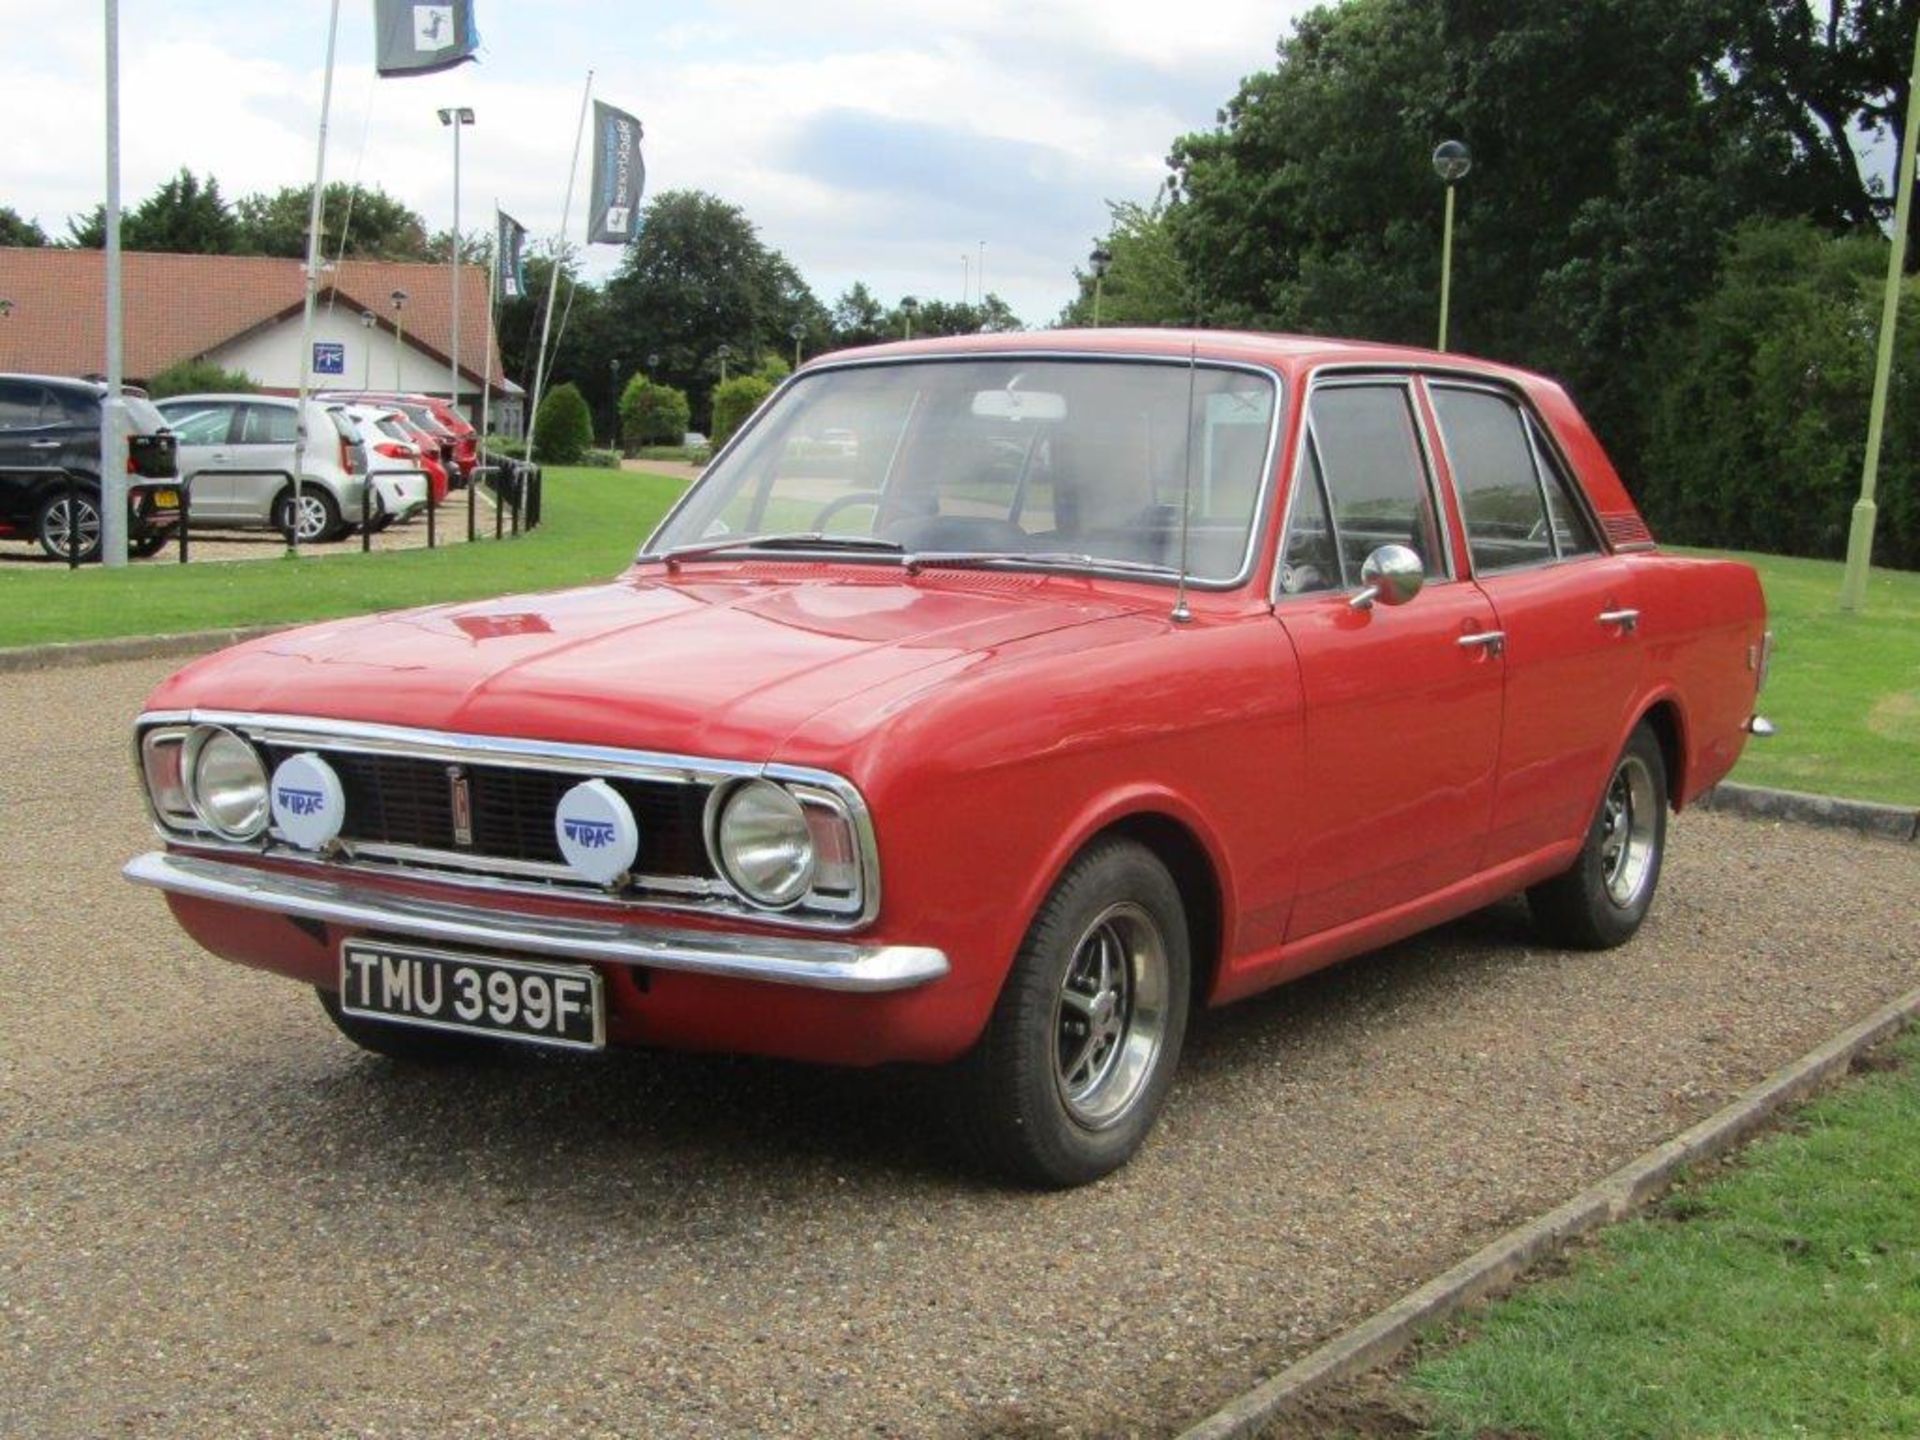 1968 Ford Cortina 1600 GT MKII - Image 3 of 11